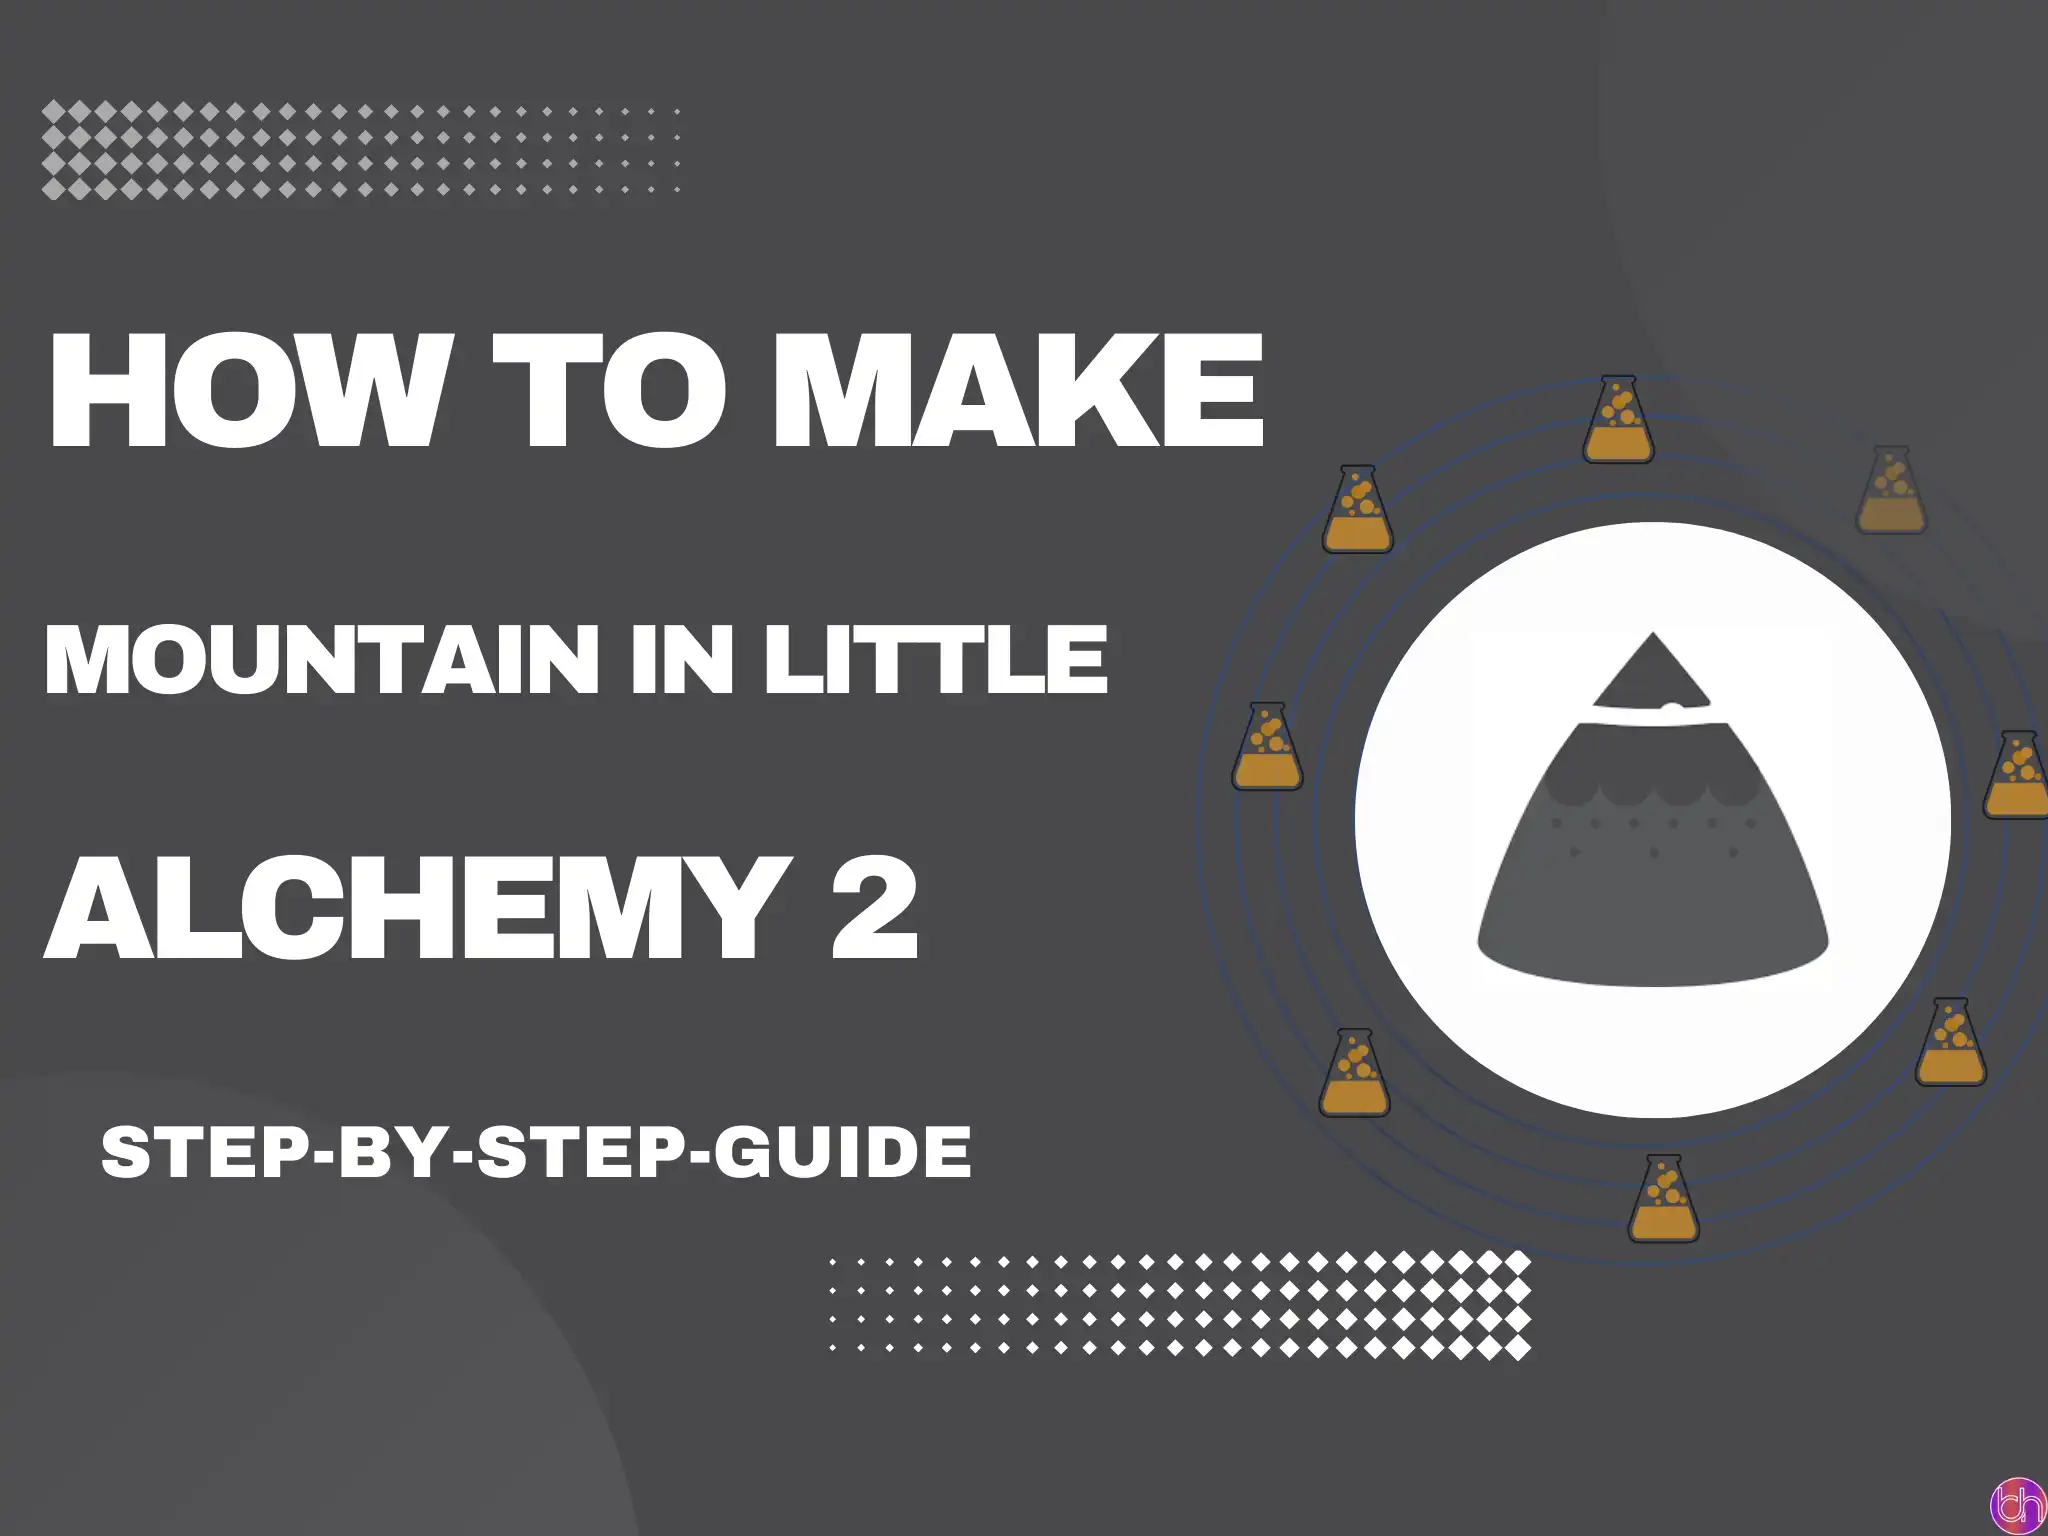 How to make Mountain in Little Alchemy 2